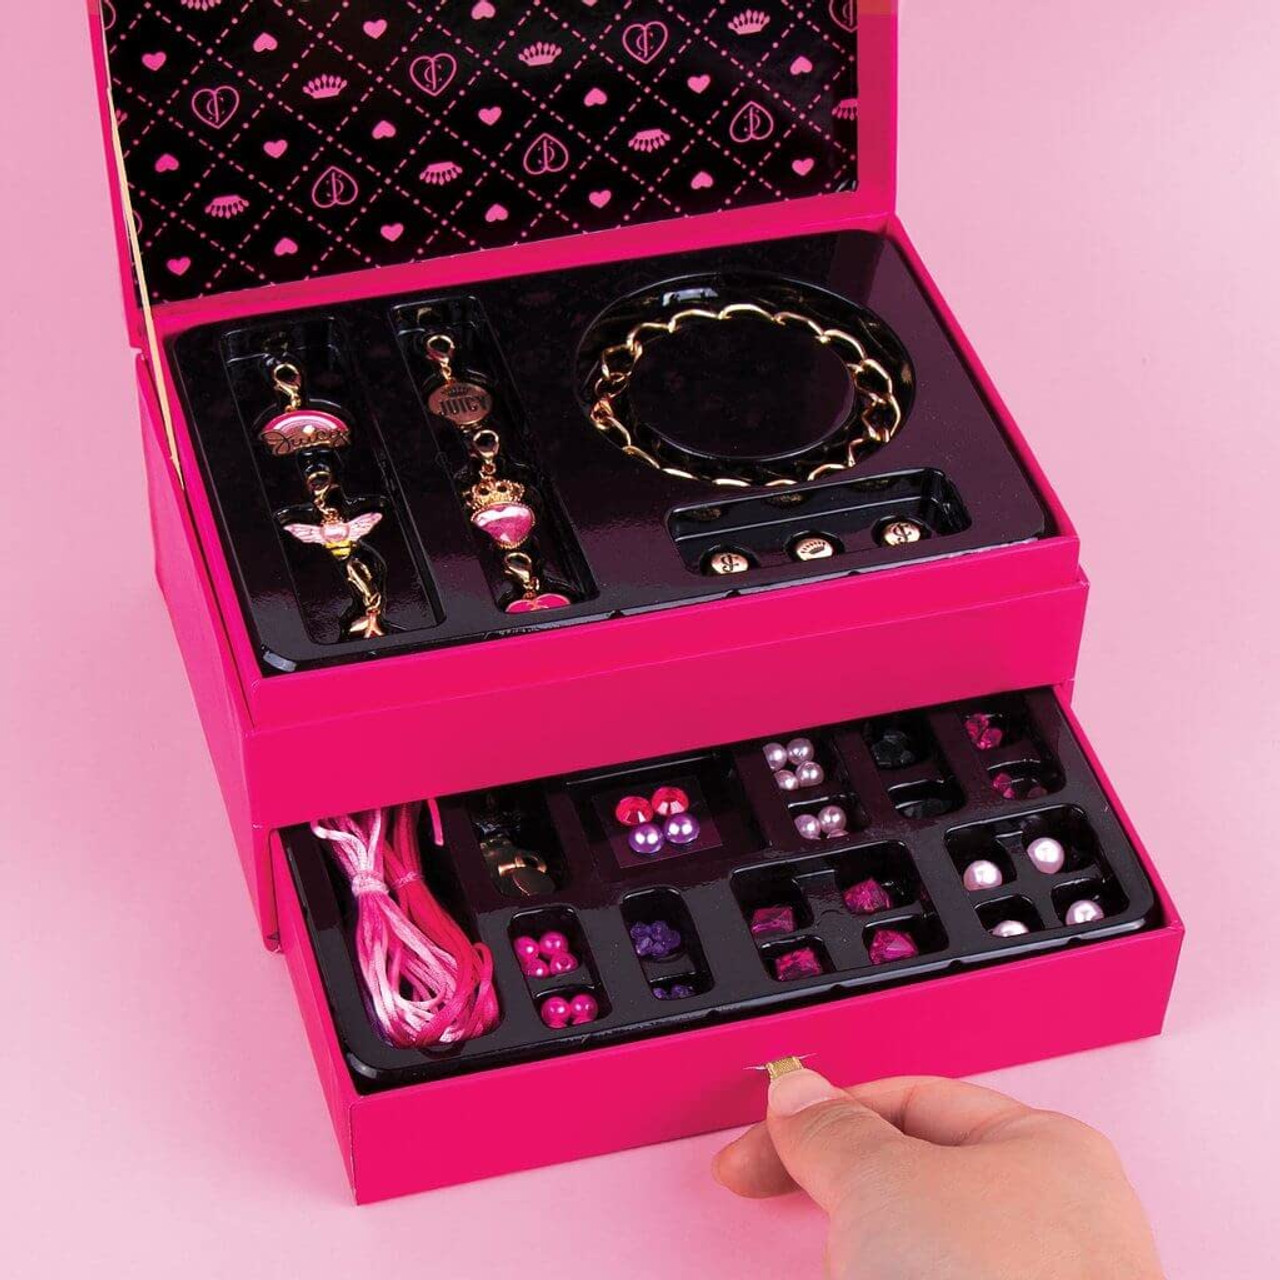 Juicy Couture Do It Yourself Jewelry Kits